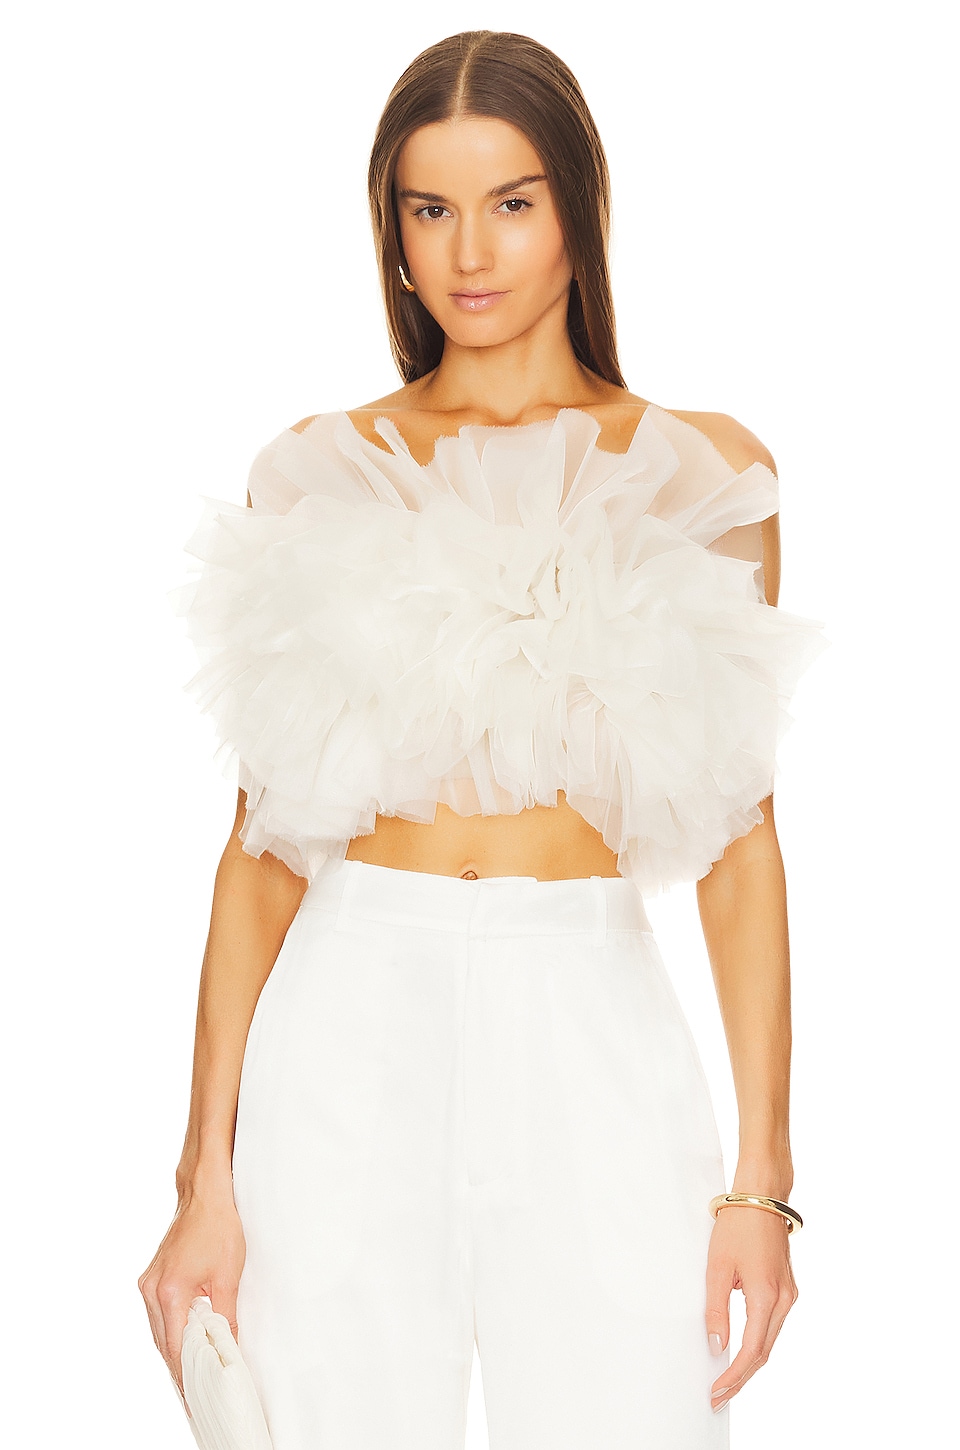 Lapointe Ruffle Poof Bustier Top in Cream | REVOLVE